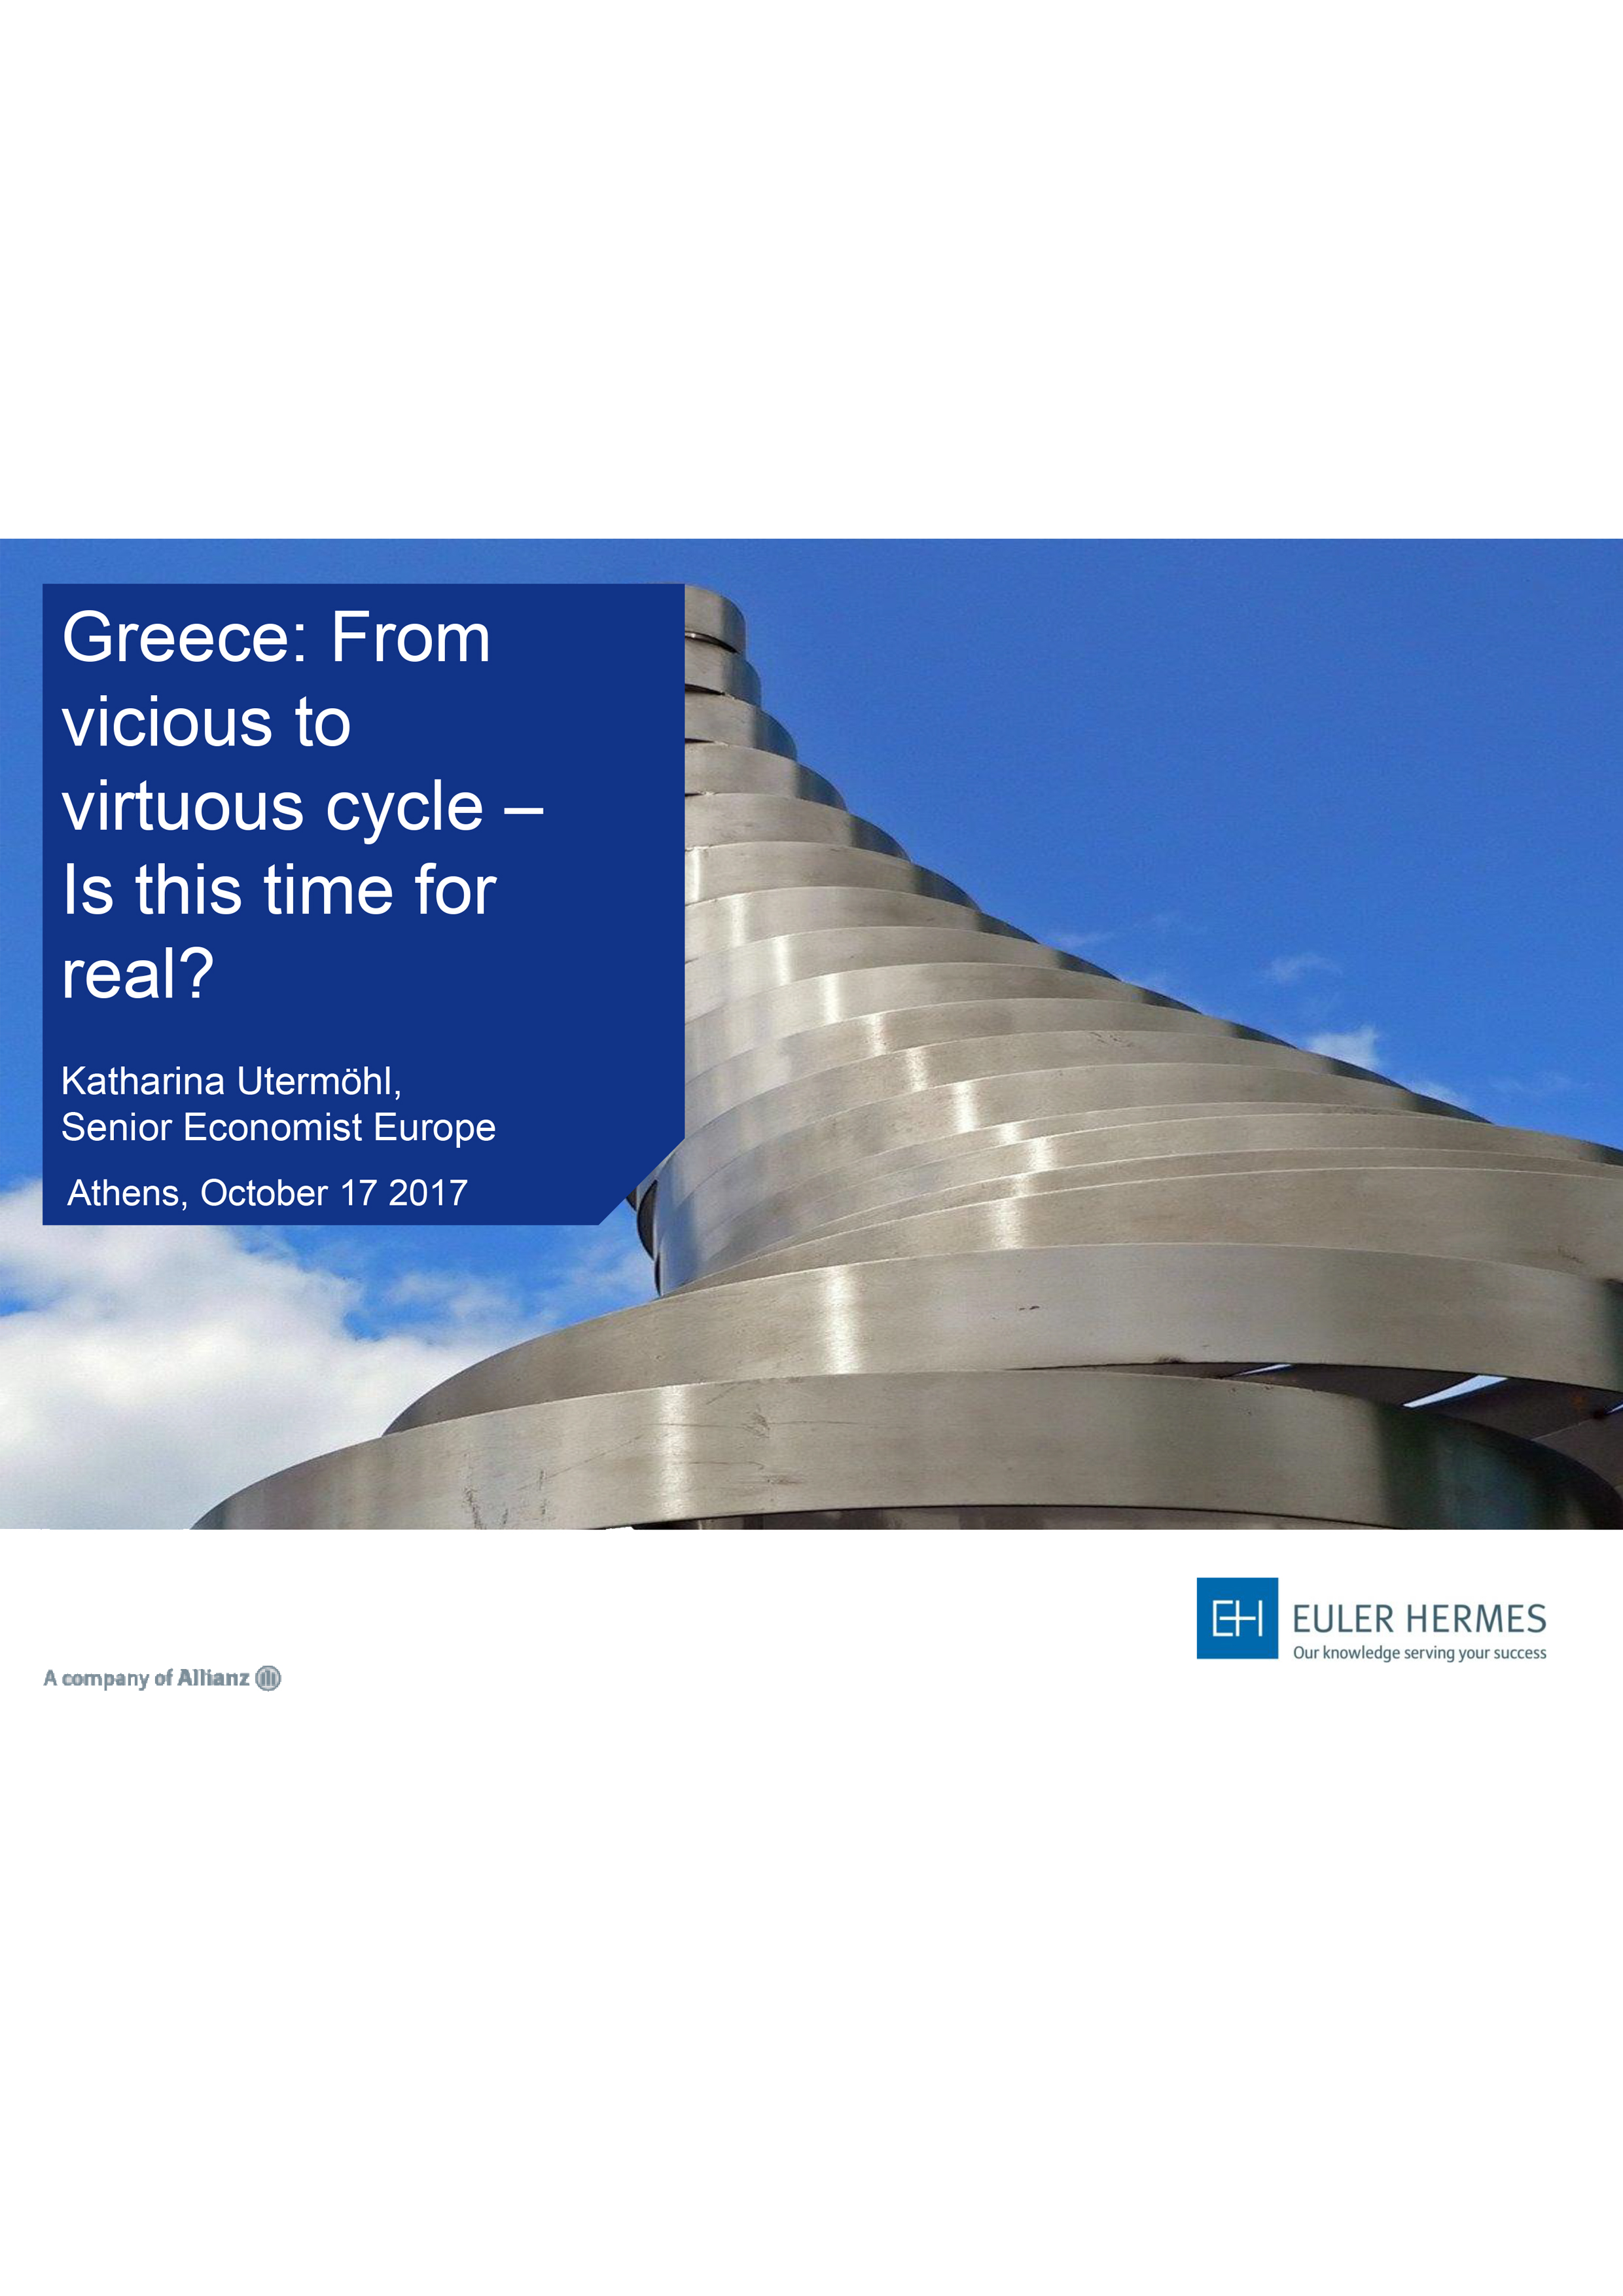 Greece: From vicious to virtuous cycle - is this time for real?